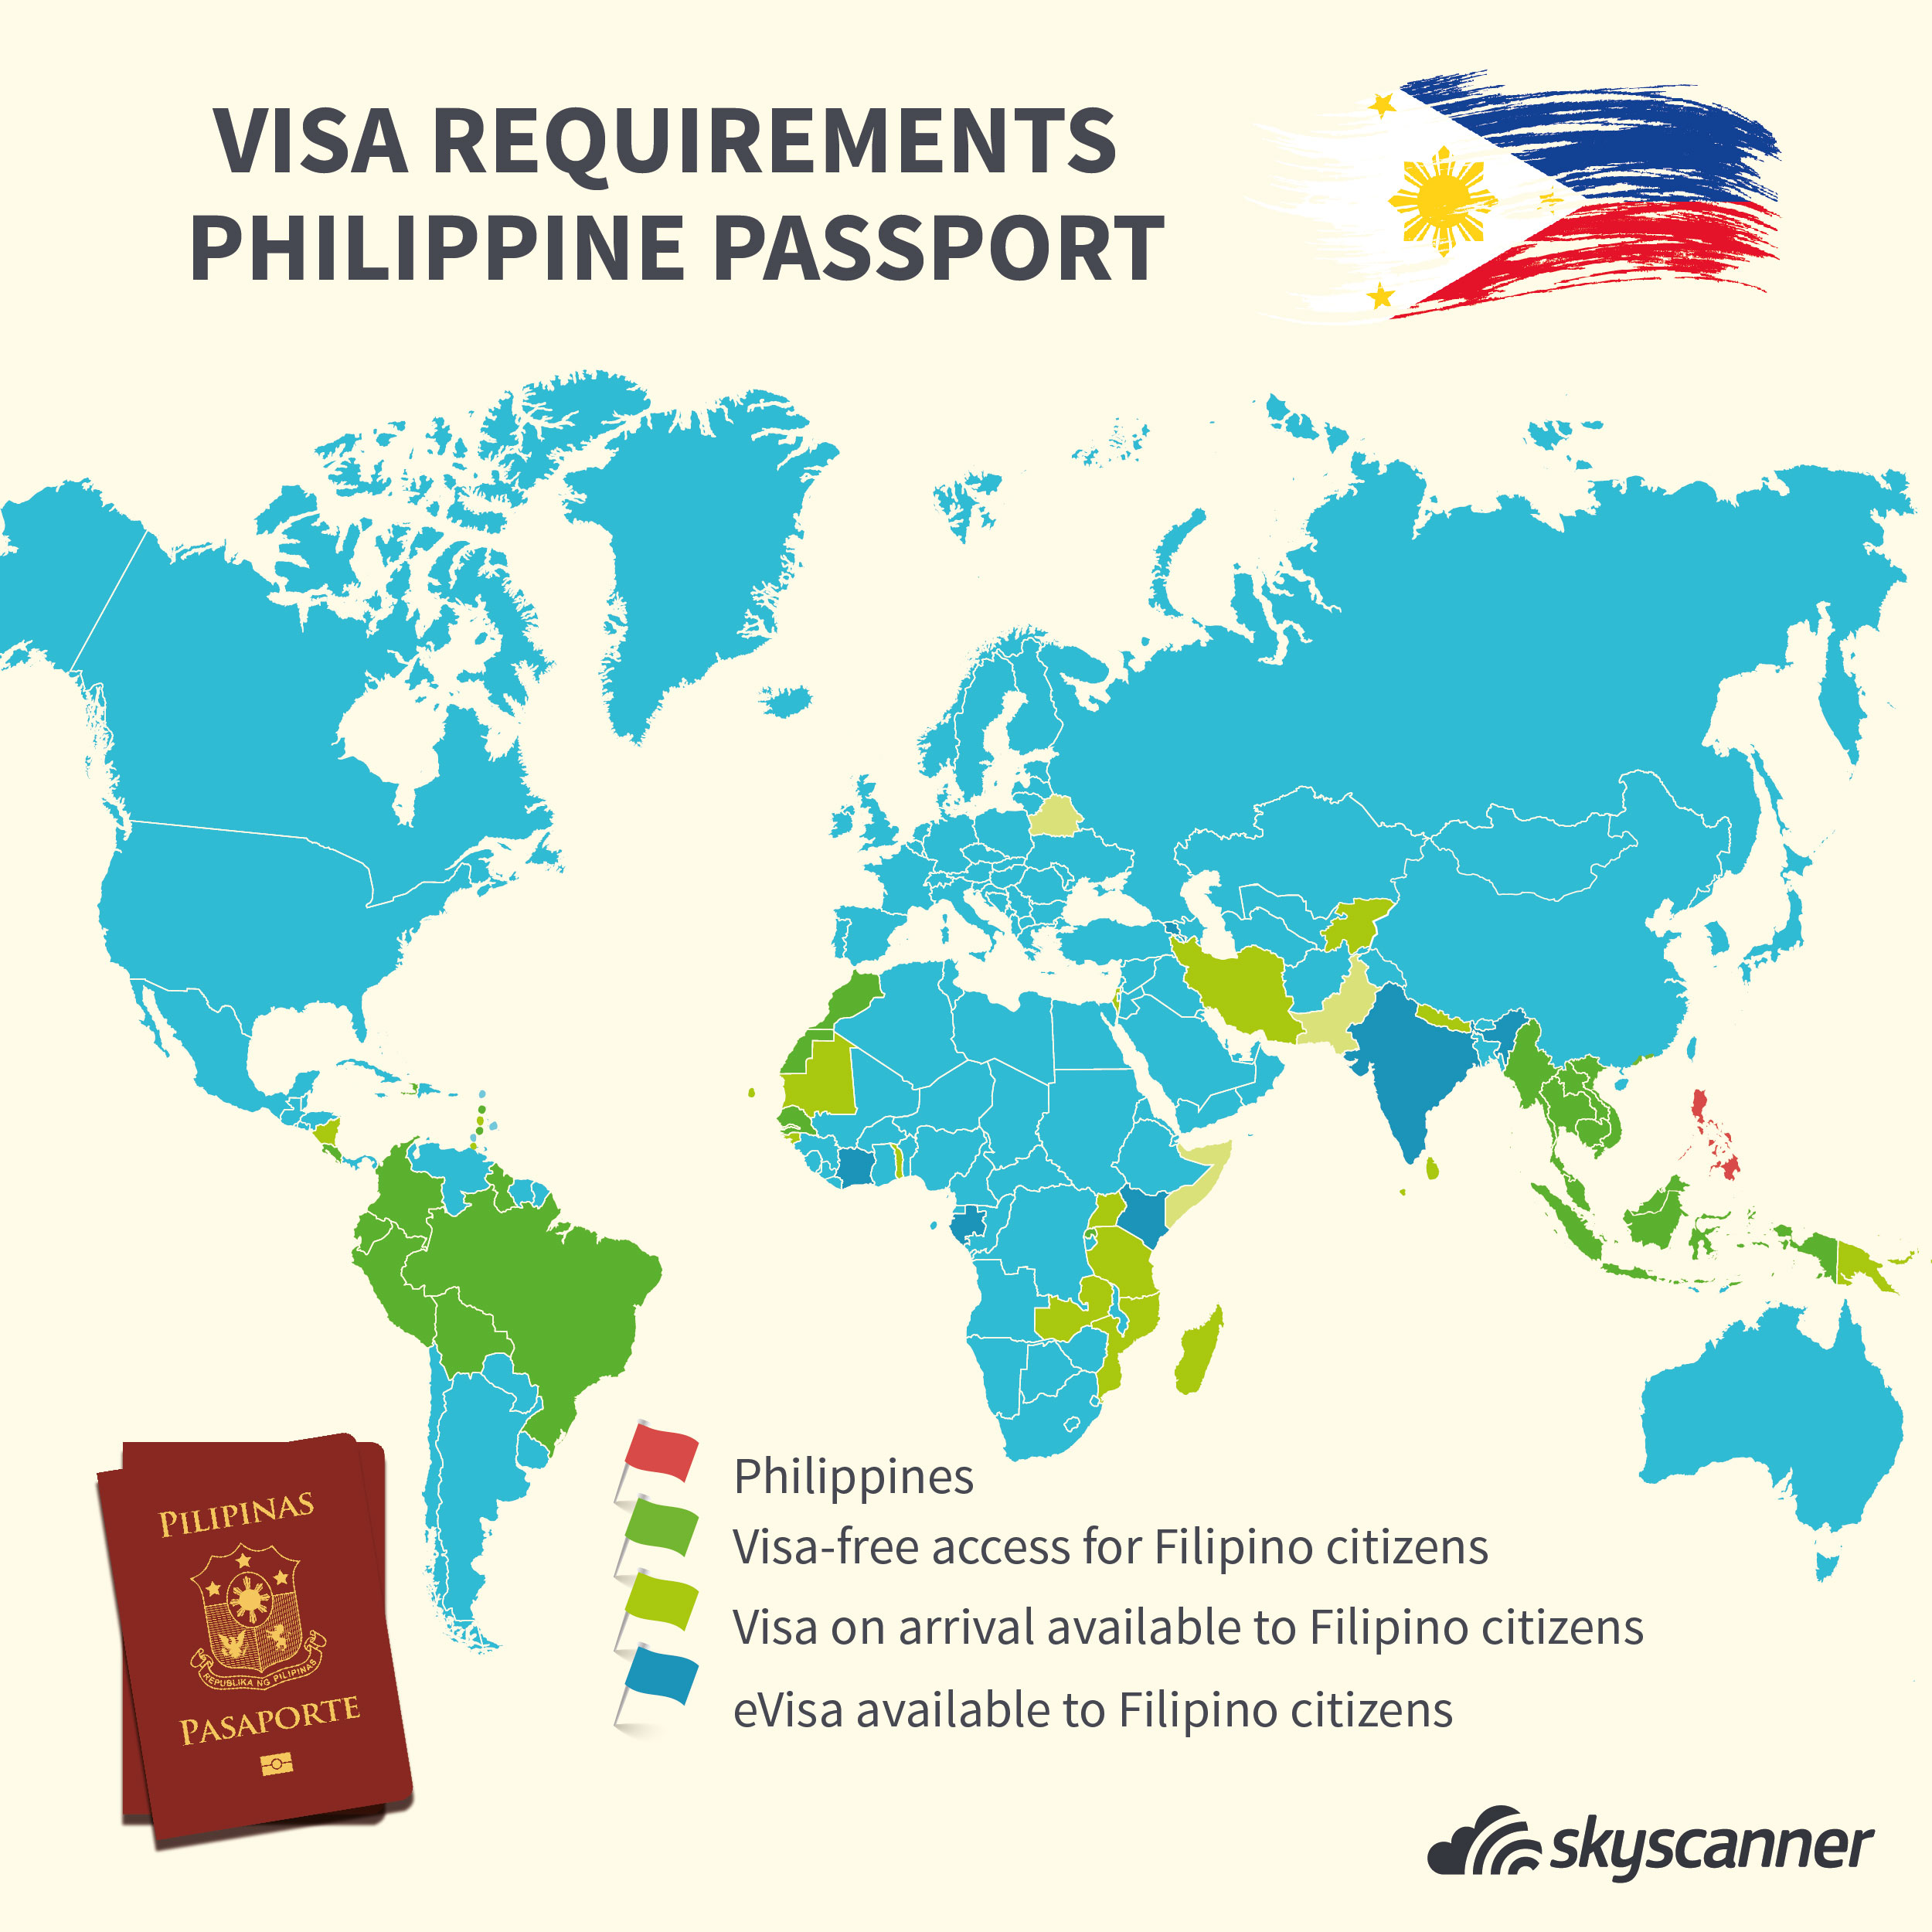 The ultimate visa requirements guide for Filipino travelers Skyscanner Philippines